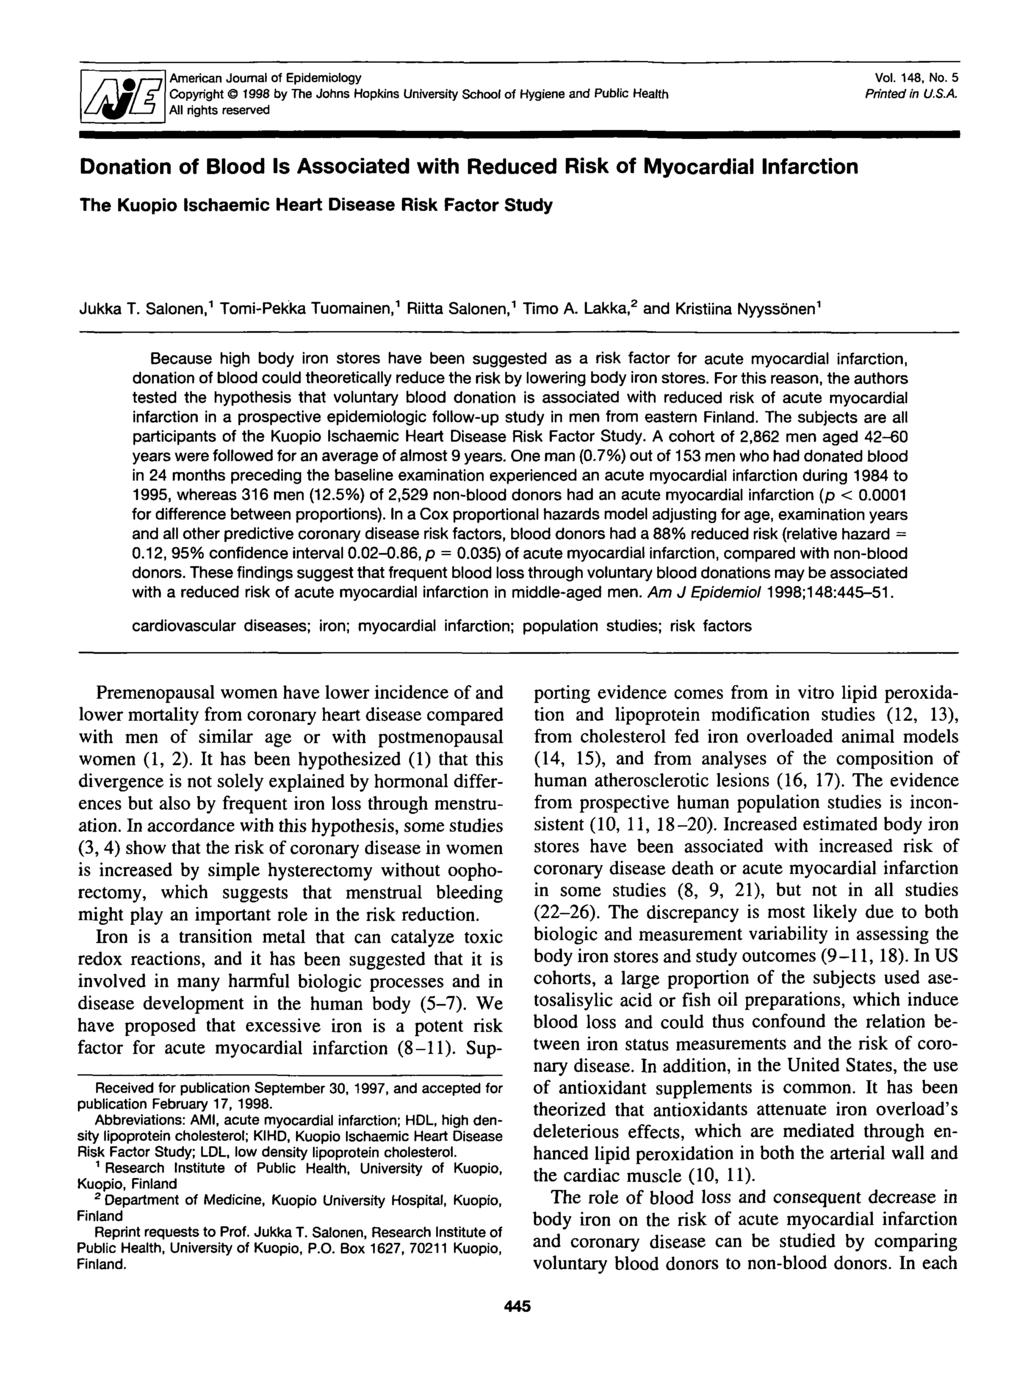 American Journal of Epidemiology Copyright 1998 by The Johns Hopkins University School of Hygiene and Public Health All rights reserved Vol. 148, No. 5 Printed in U.S.A. Donation of Blood Is Associated with Reduced Risk of Myocardial Infarction The Kuopio Ischaemic Heart Disease Risk Factor Study Jukka T.